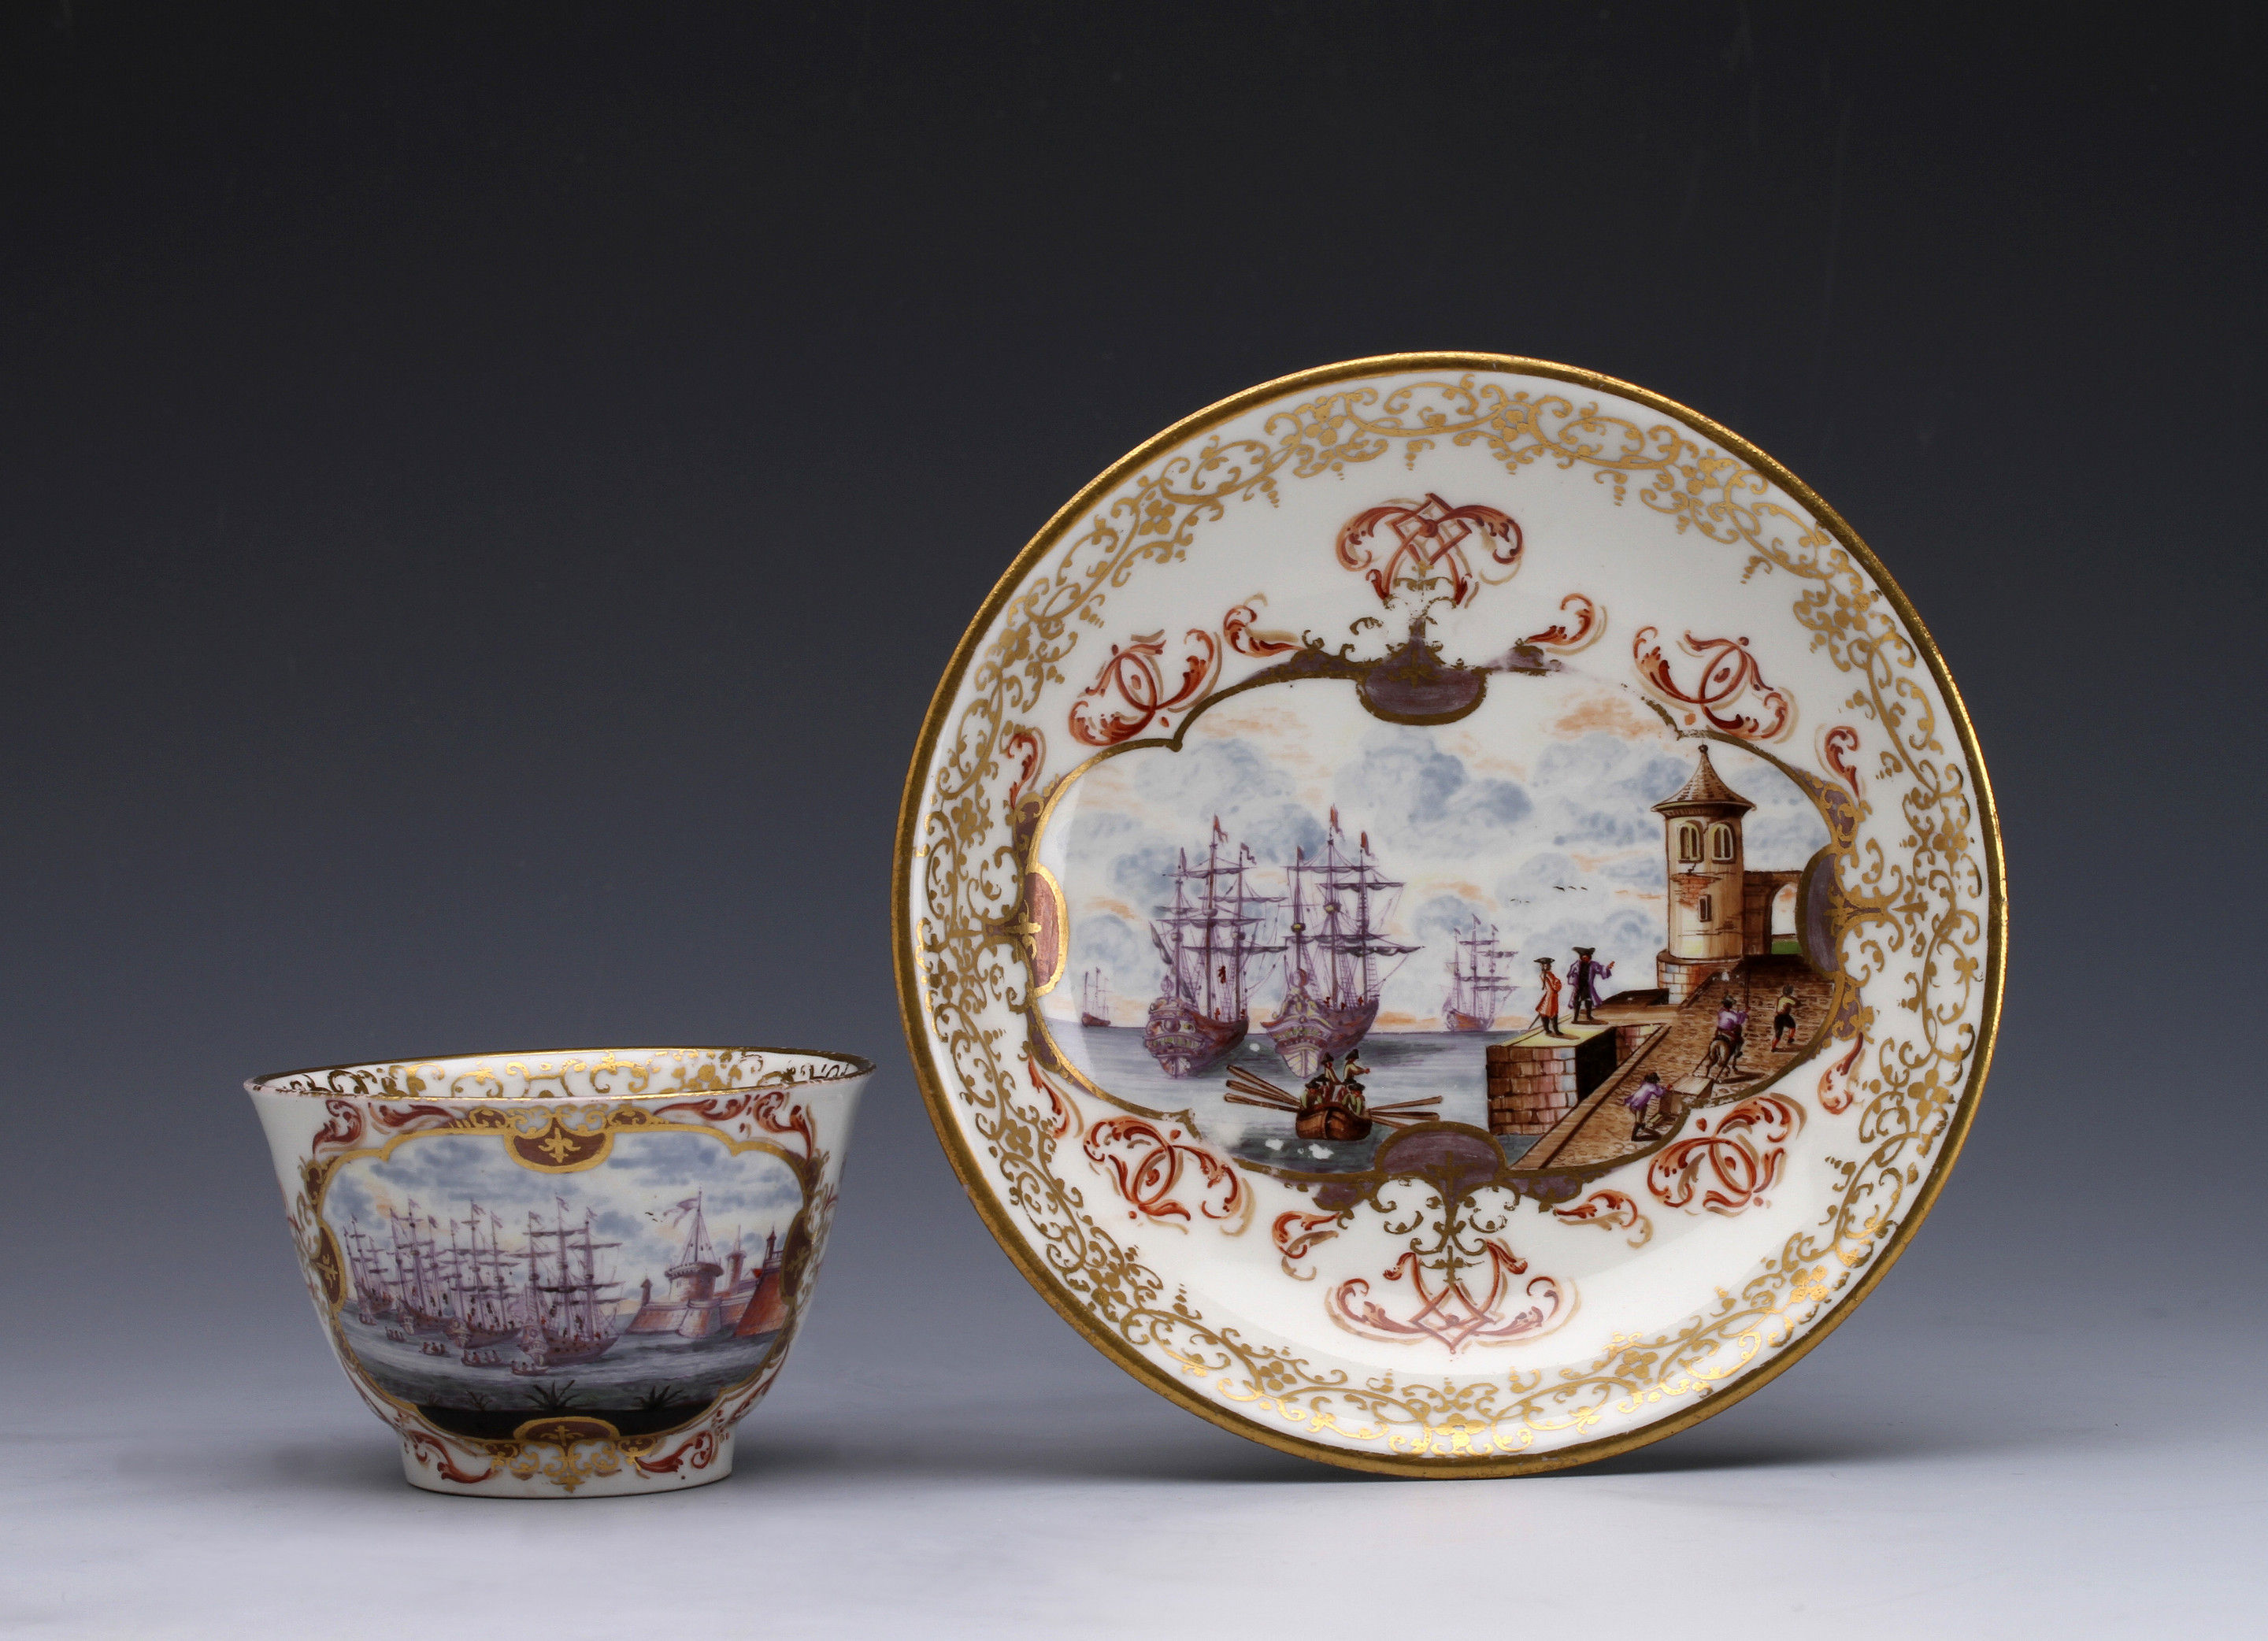 An early Meissen Porcelain teabowl and saucer